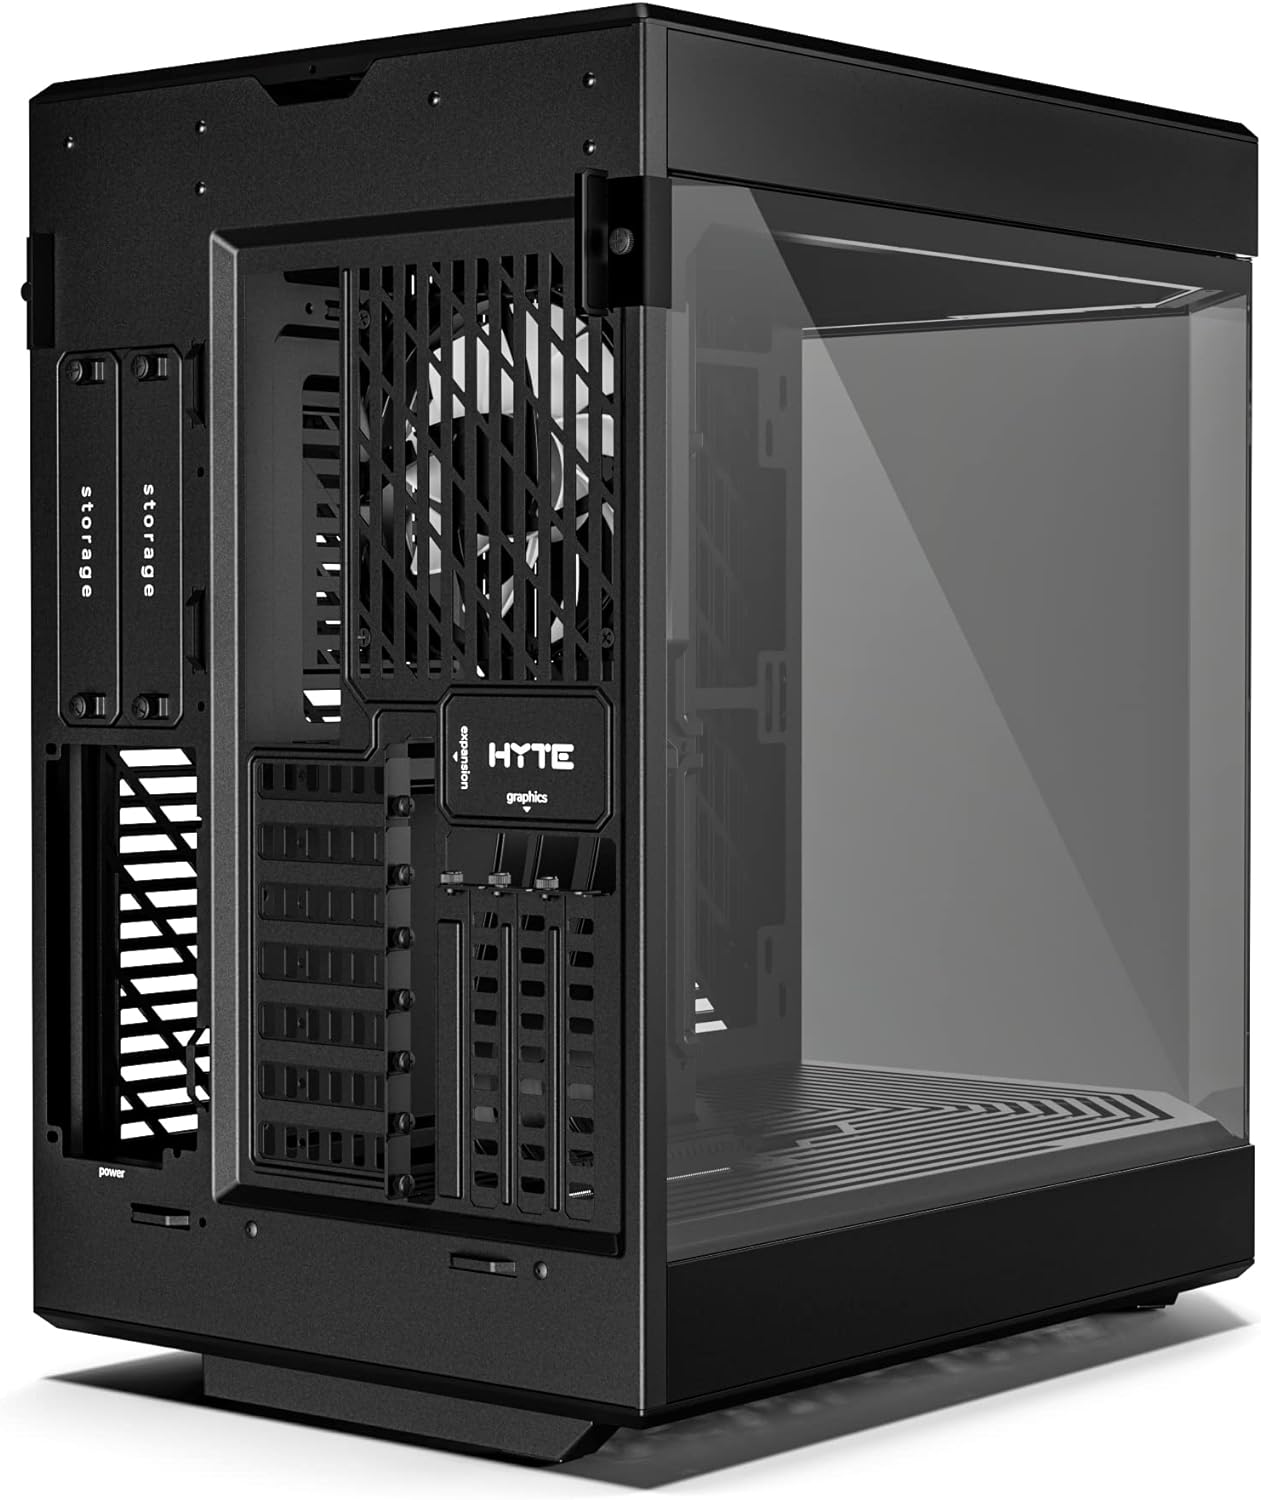 SKU: 0848604042855, Barcode: 848604042855 - HYTE Y60 Modern Aesthetic Mid-Tower ATX Gaming Case - Tempered Glass, PCIE 4.0 Riser Cable - Black: Cold floor cooling system for efficient heat dissipation.